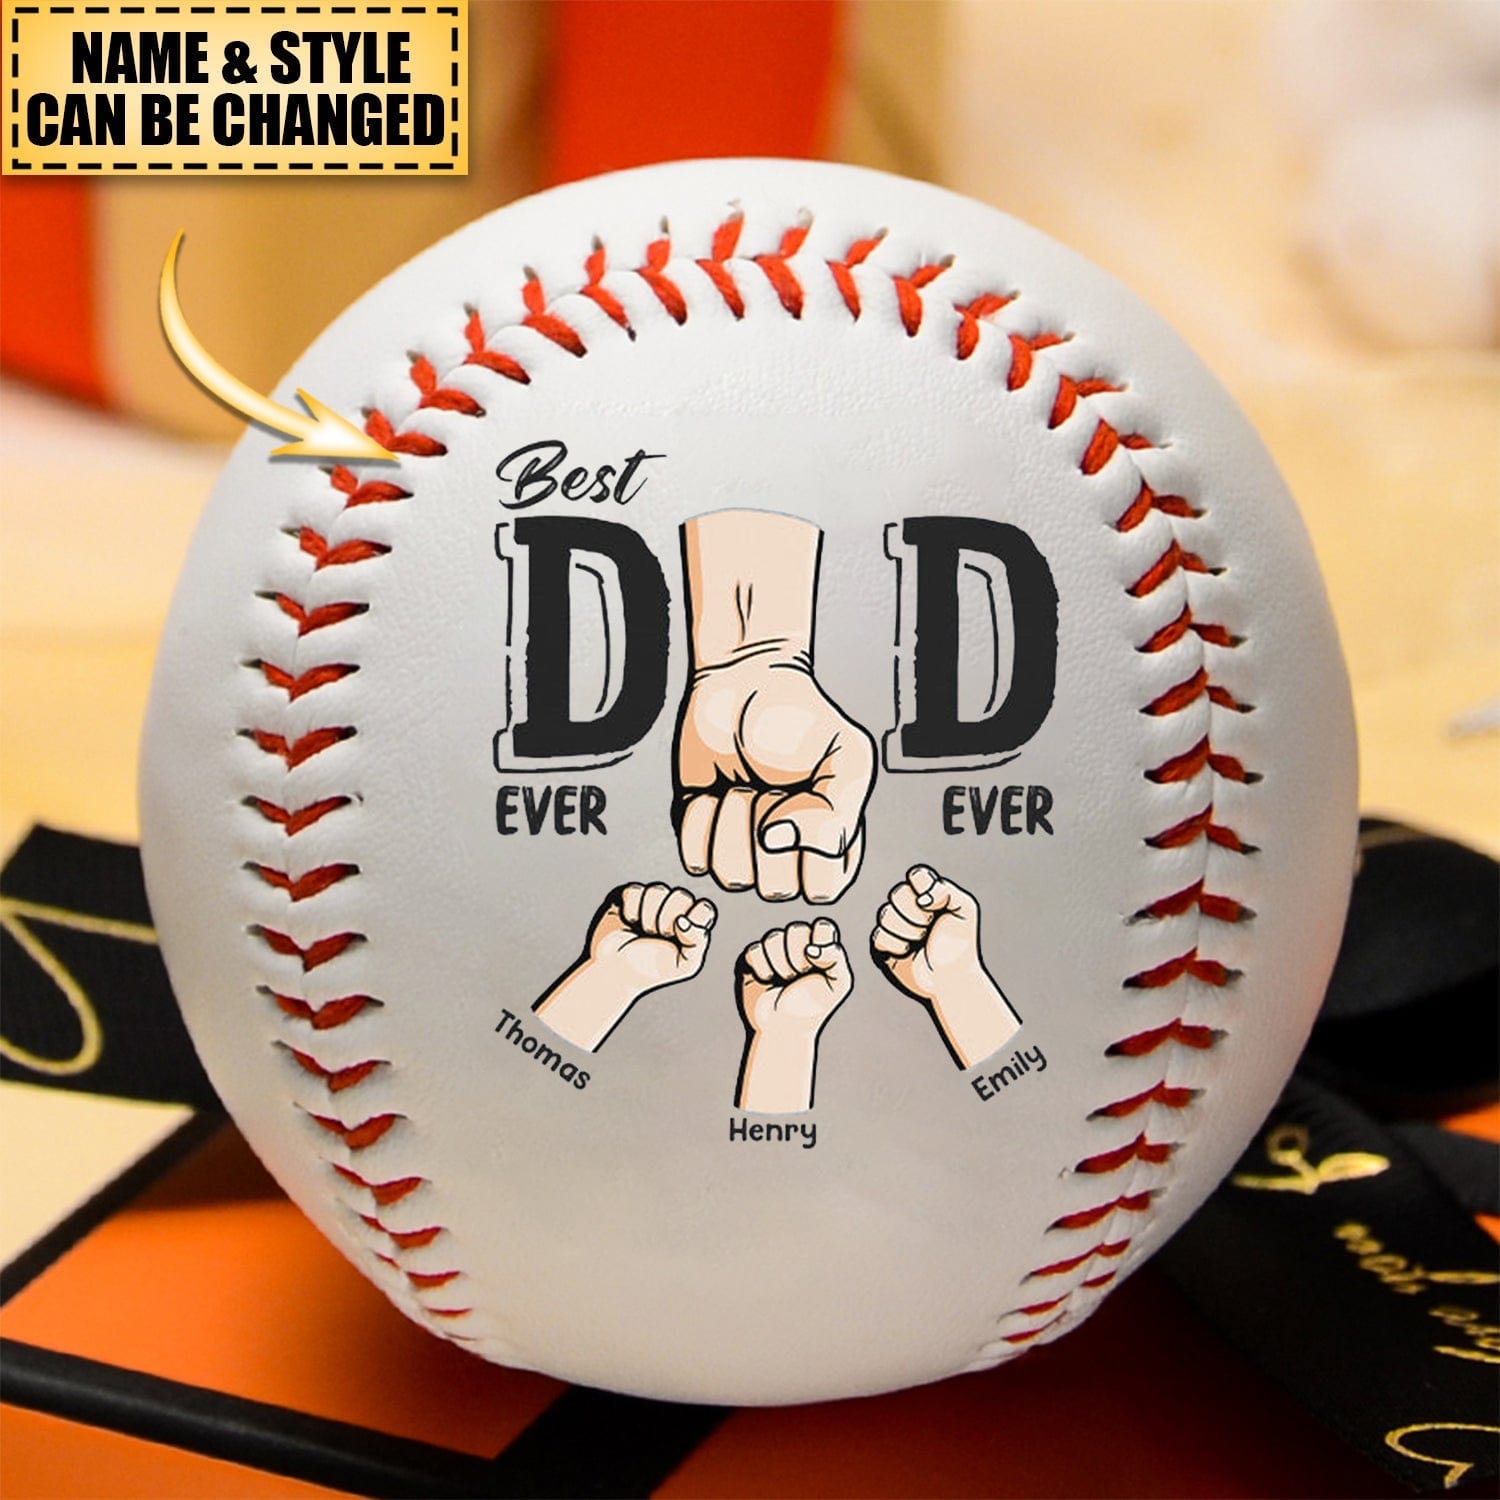 Best Dad Ever - Family Personalized Custom Baseball